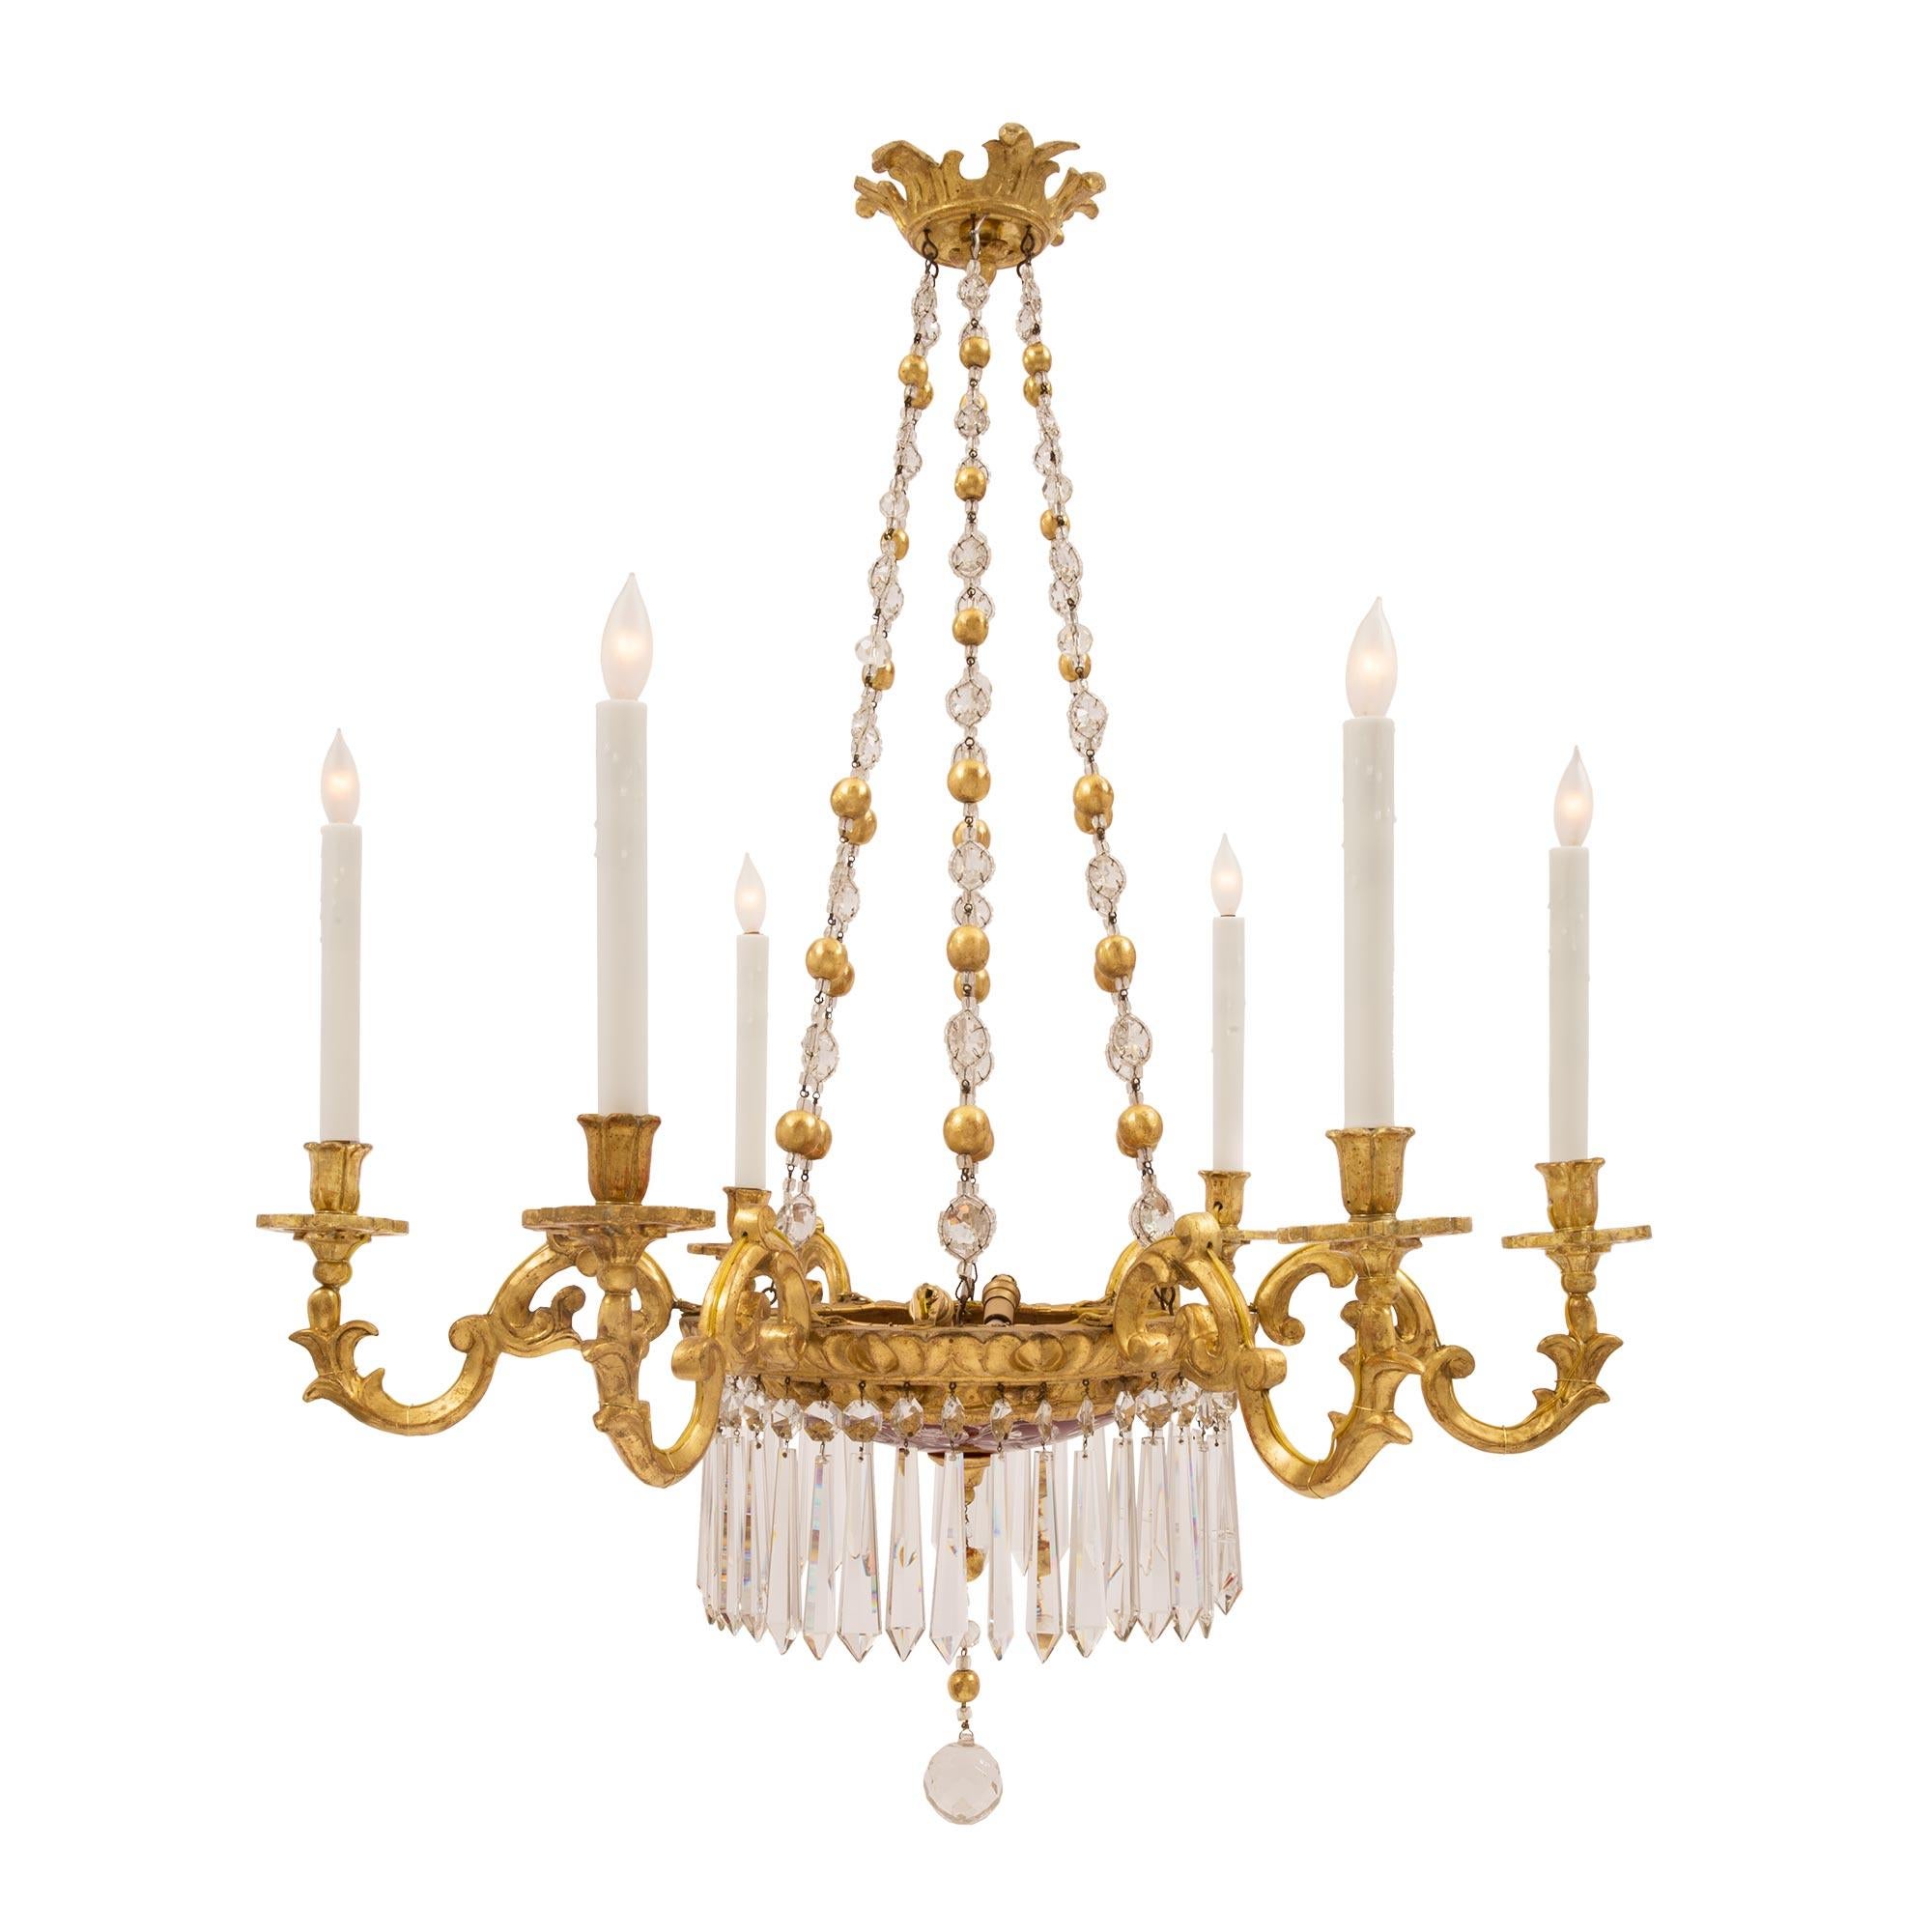 A stunning Italian 19th century Louis XV st. giltwood, crystal and ox blood red etched glass six arm chandelier. The chandelier is centered by an elegant cut crystal ball below a striking and most decorative ox blood red glass dome with etched